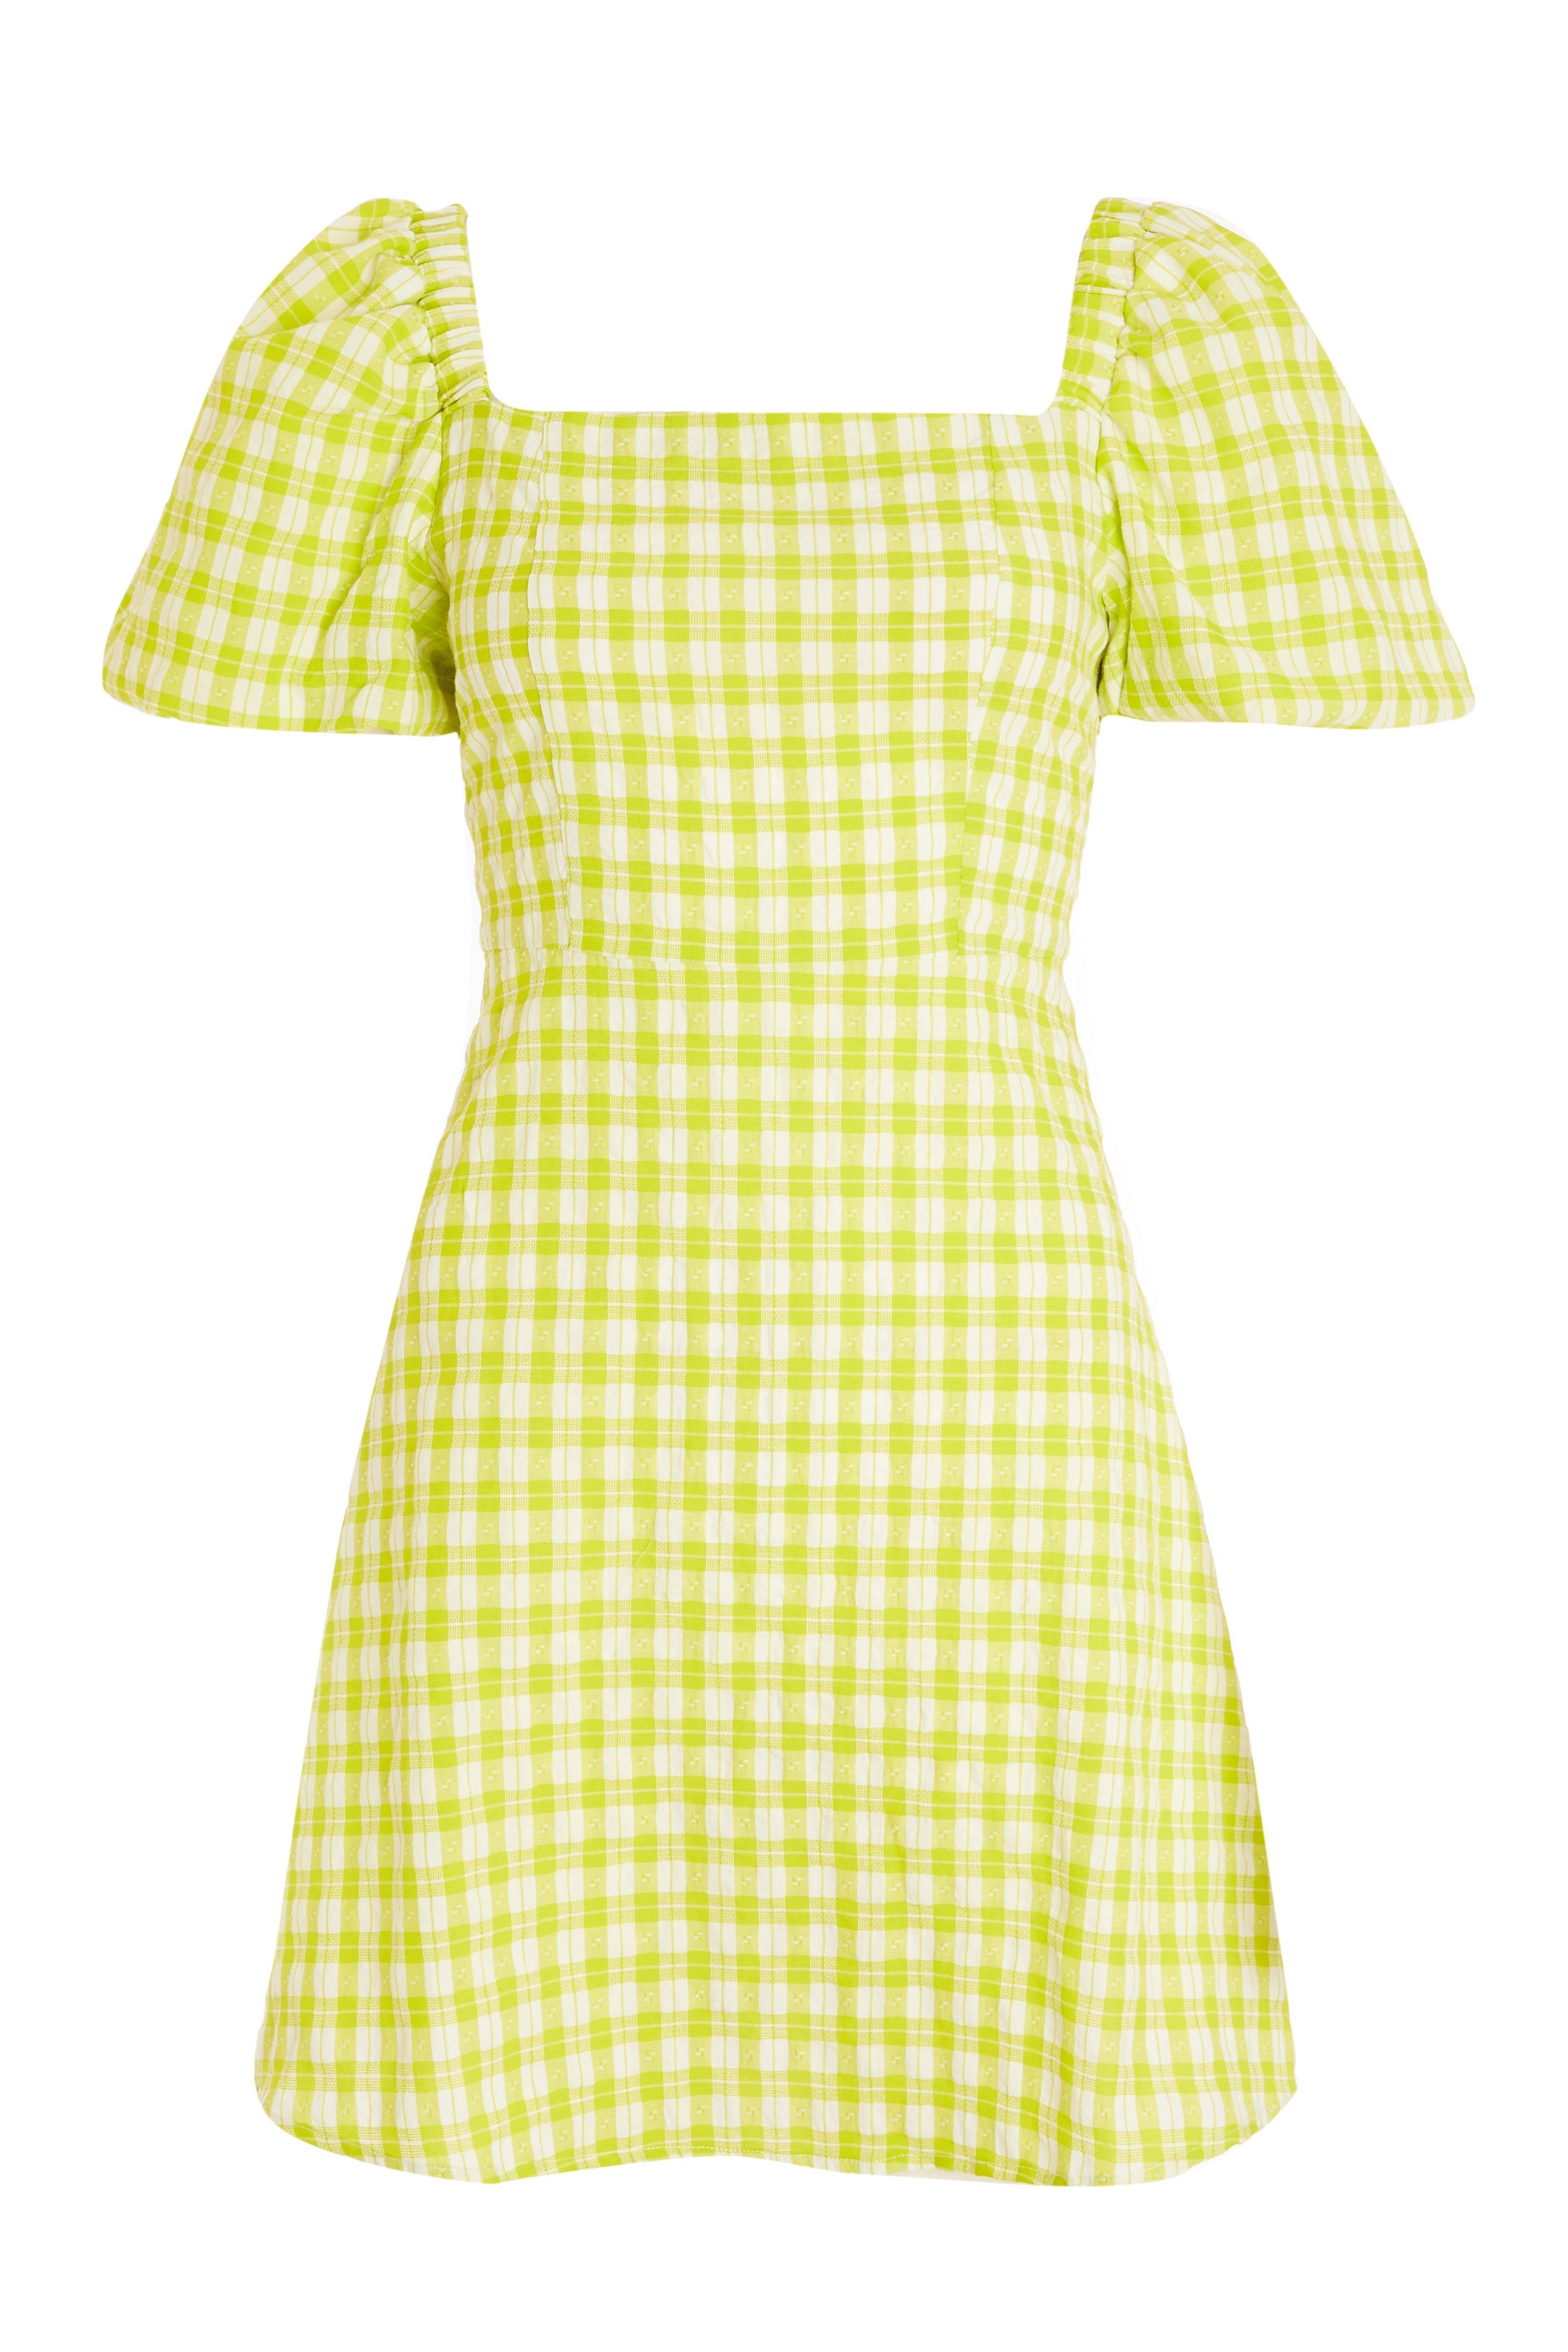 - Gingham print  - A-line dress  - Puff sleeve  - Zip back  - Square neckline  - Length: 90cm approx  - Model Height: 5' 9